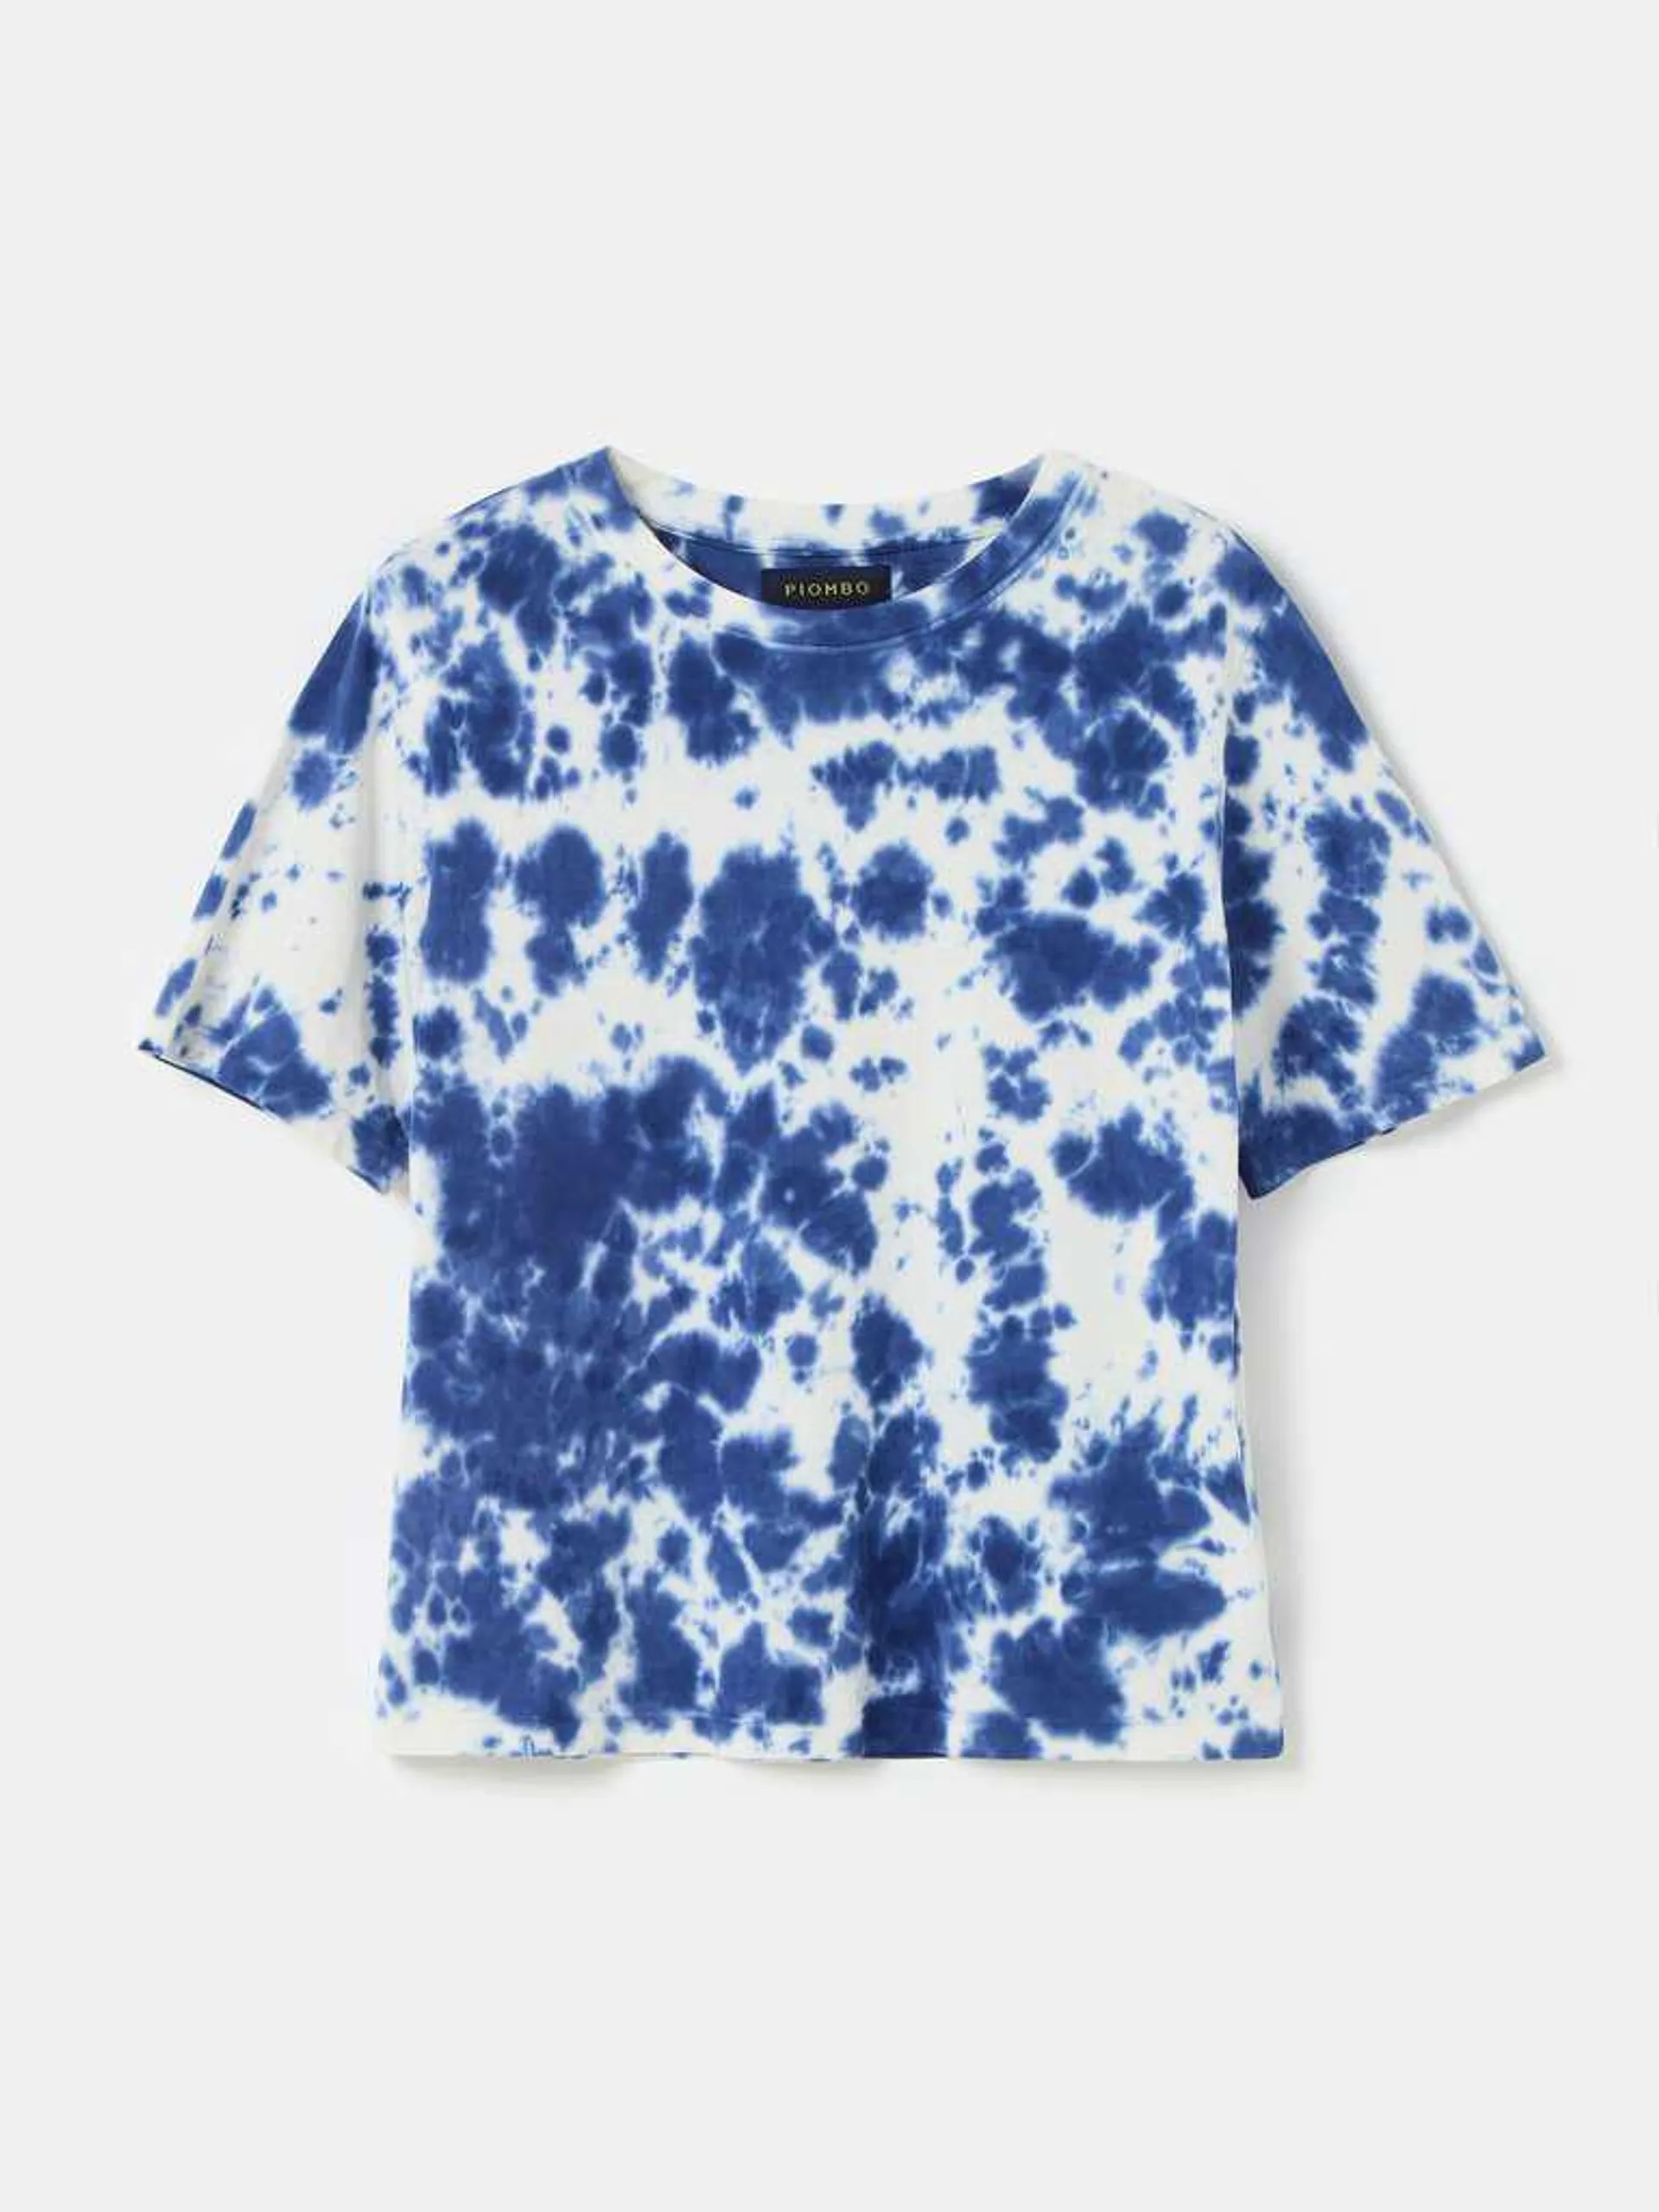 White/Blue T-shirt in cotton with tie-dye print